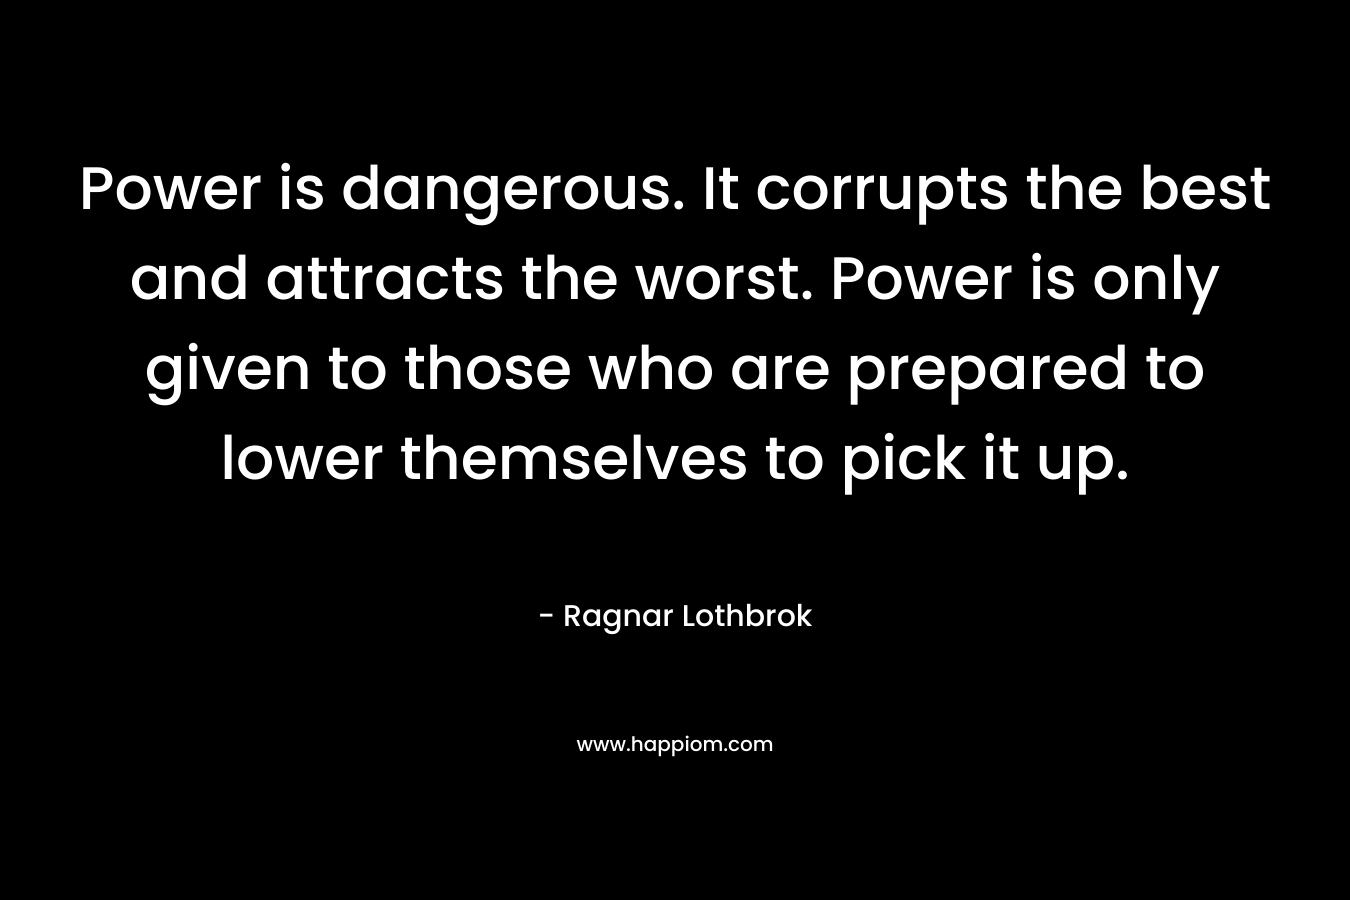 Power is dangerous. It corrupts the best and attracts the worst. Power is only given to those who are prepared to lower themselves to pick it up. – Ragnar Lothbrok